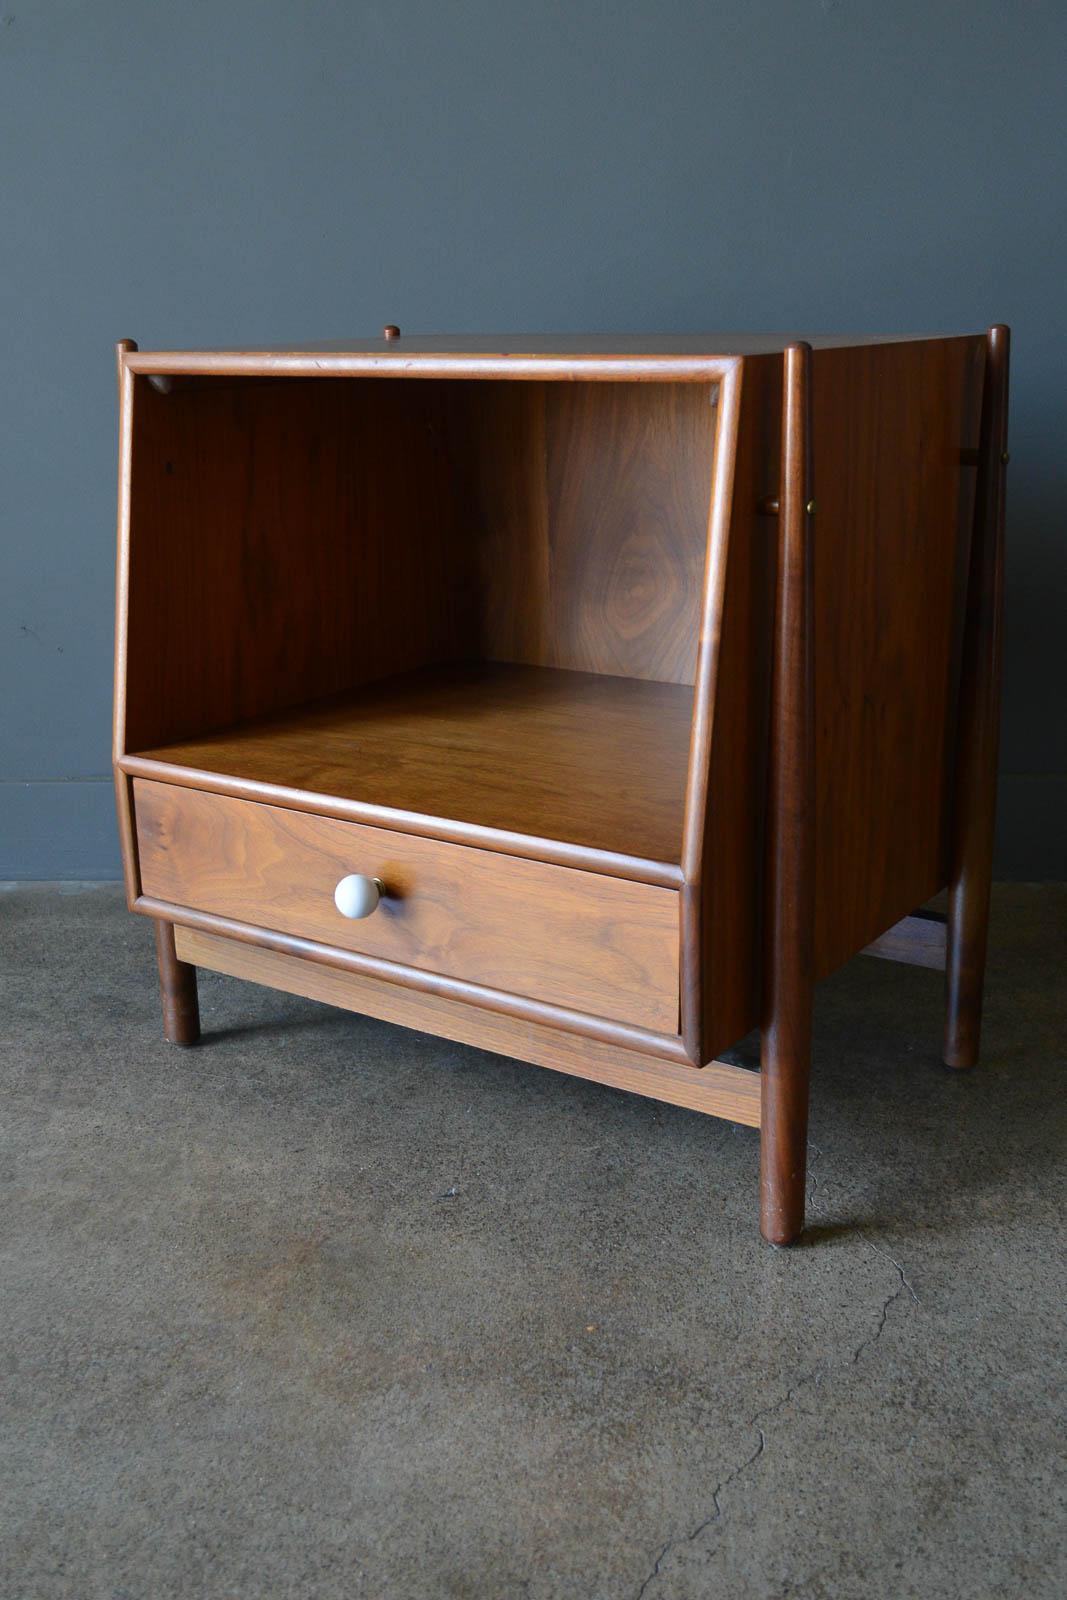 Kipp Stewart for Drexel Declaration Floating Nightstand or End Table, ca. 1965. Single nightstand in good vintage condition. This piece has not been restored. Has some slight wear as shown but very usable as is. Beautiful floating frame design with